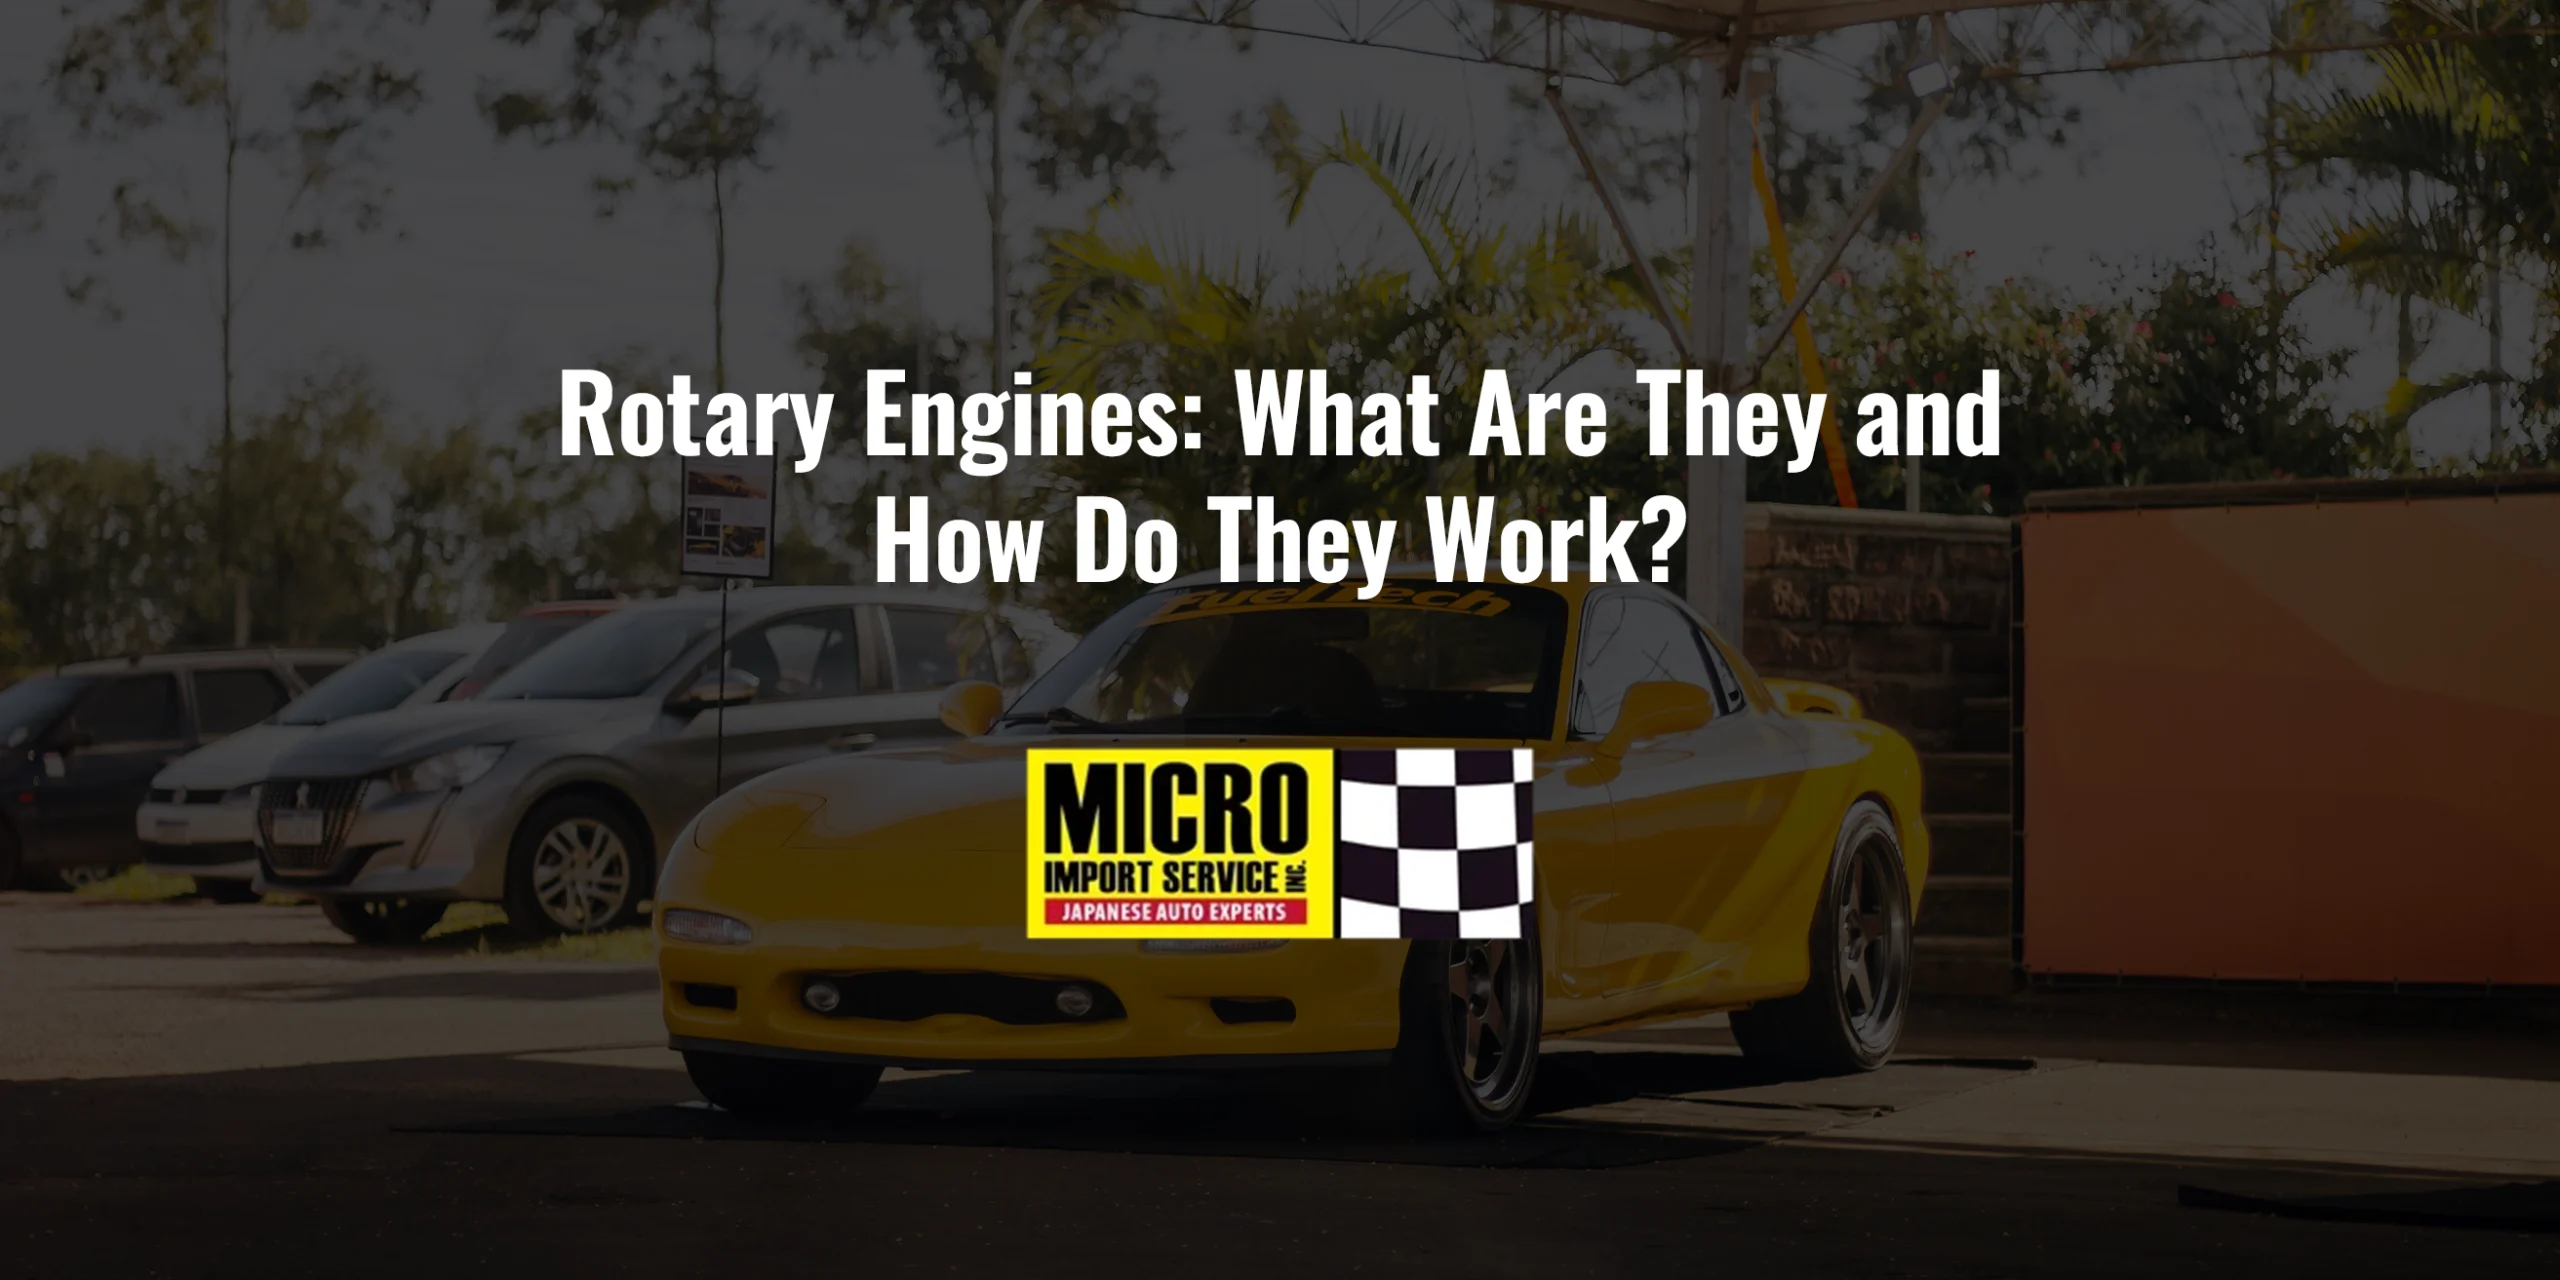 Rotary Engines: What Are They and How Do They Work?